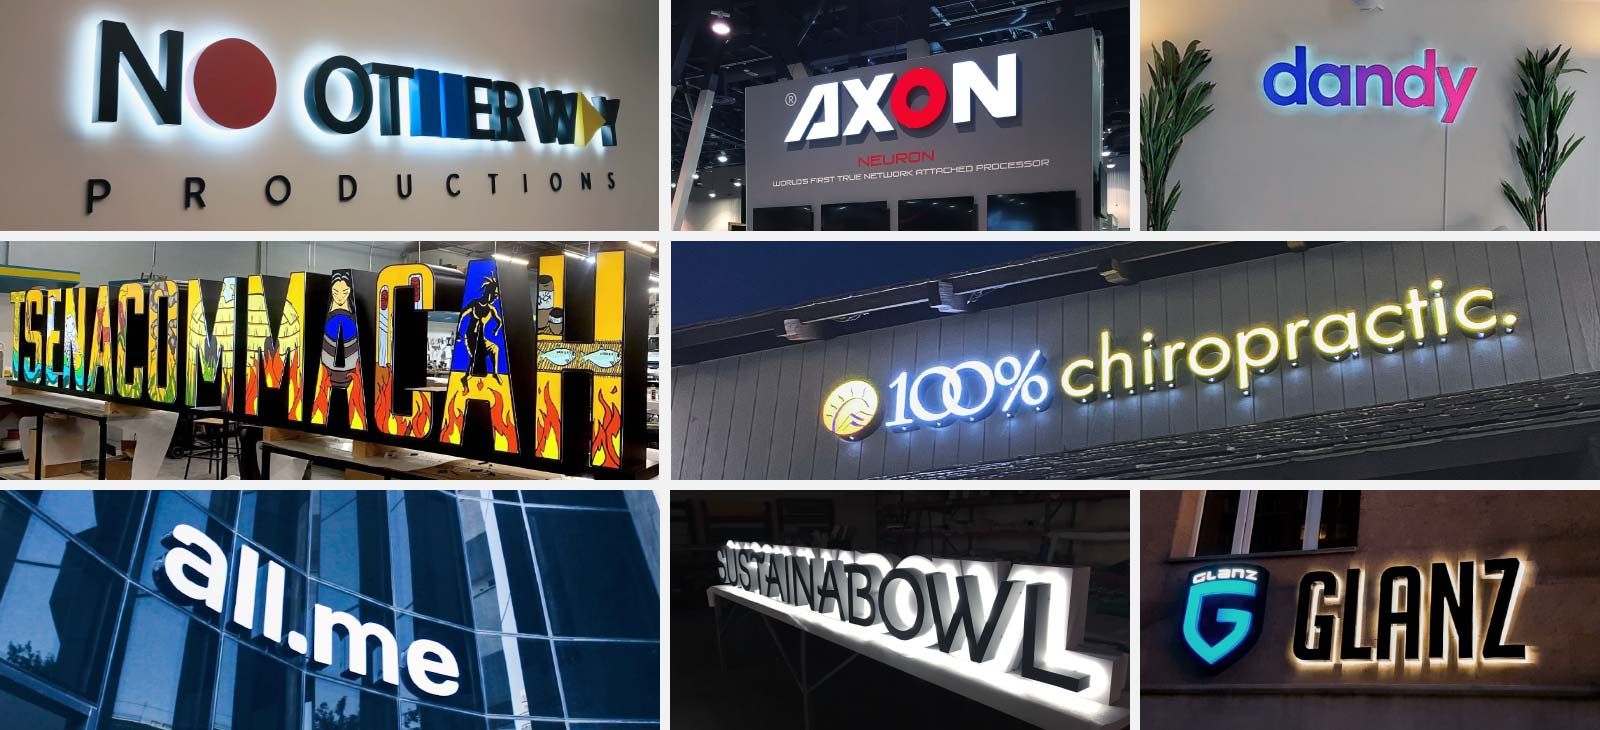 Lighted channel letters displaying different brand names and logos in diverse styles